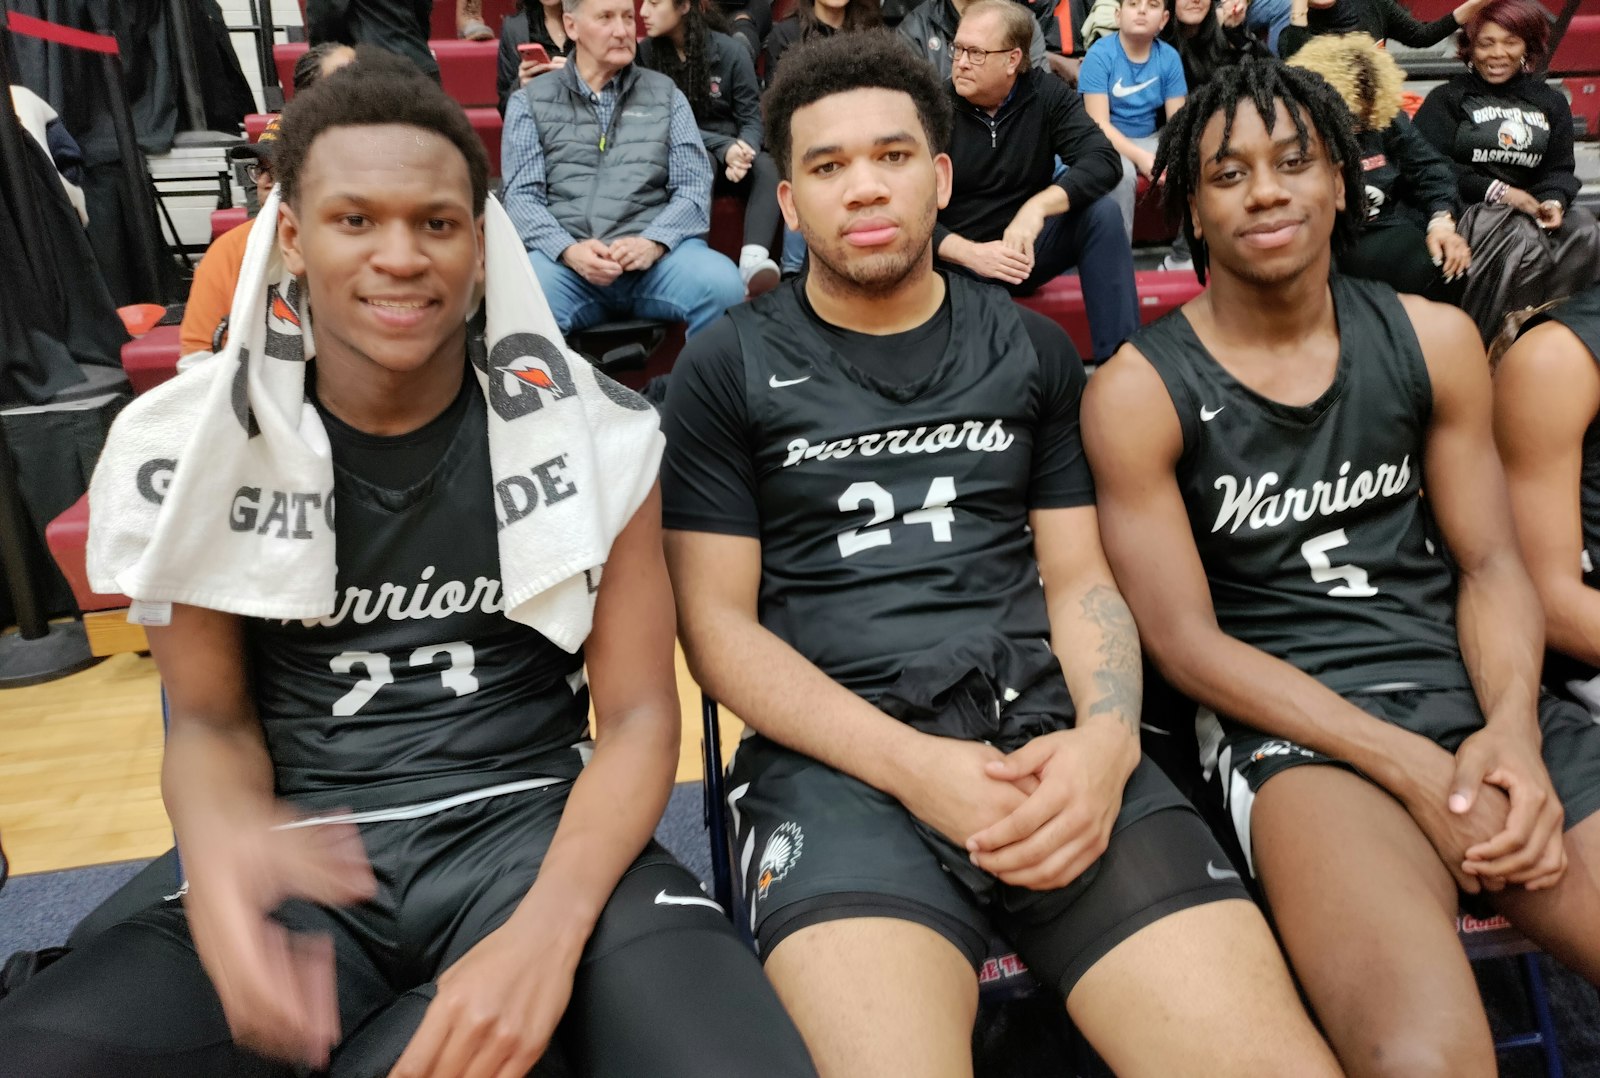 Dubbed “The Big 3,” Curtis Williams, left (Louisville commit), Xavier Thomas (Toledo) and Johnathon Blackwell (Wisconsin) led Brother Rice in scoring, rebounds, assists, and steals, and each surpassed the 1,000-point level in their prep careers. They elevated Rice’s basketball program to statewide prominence.